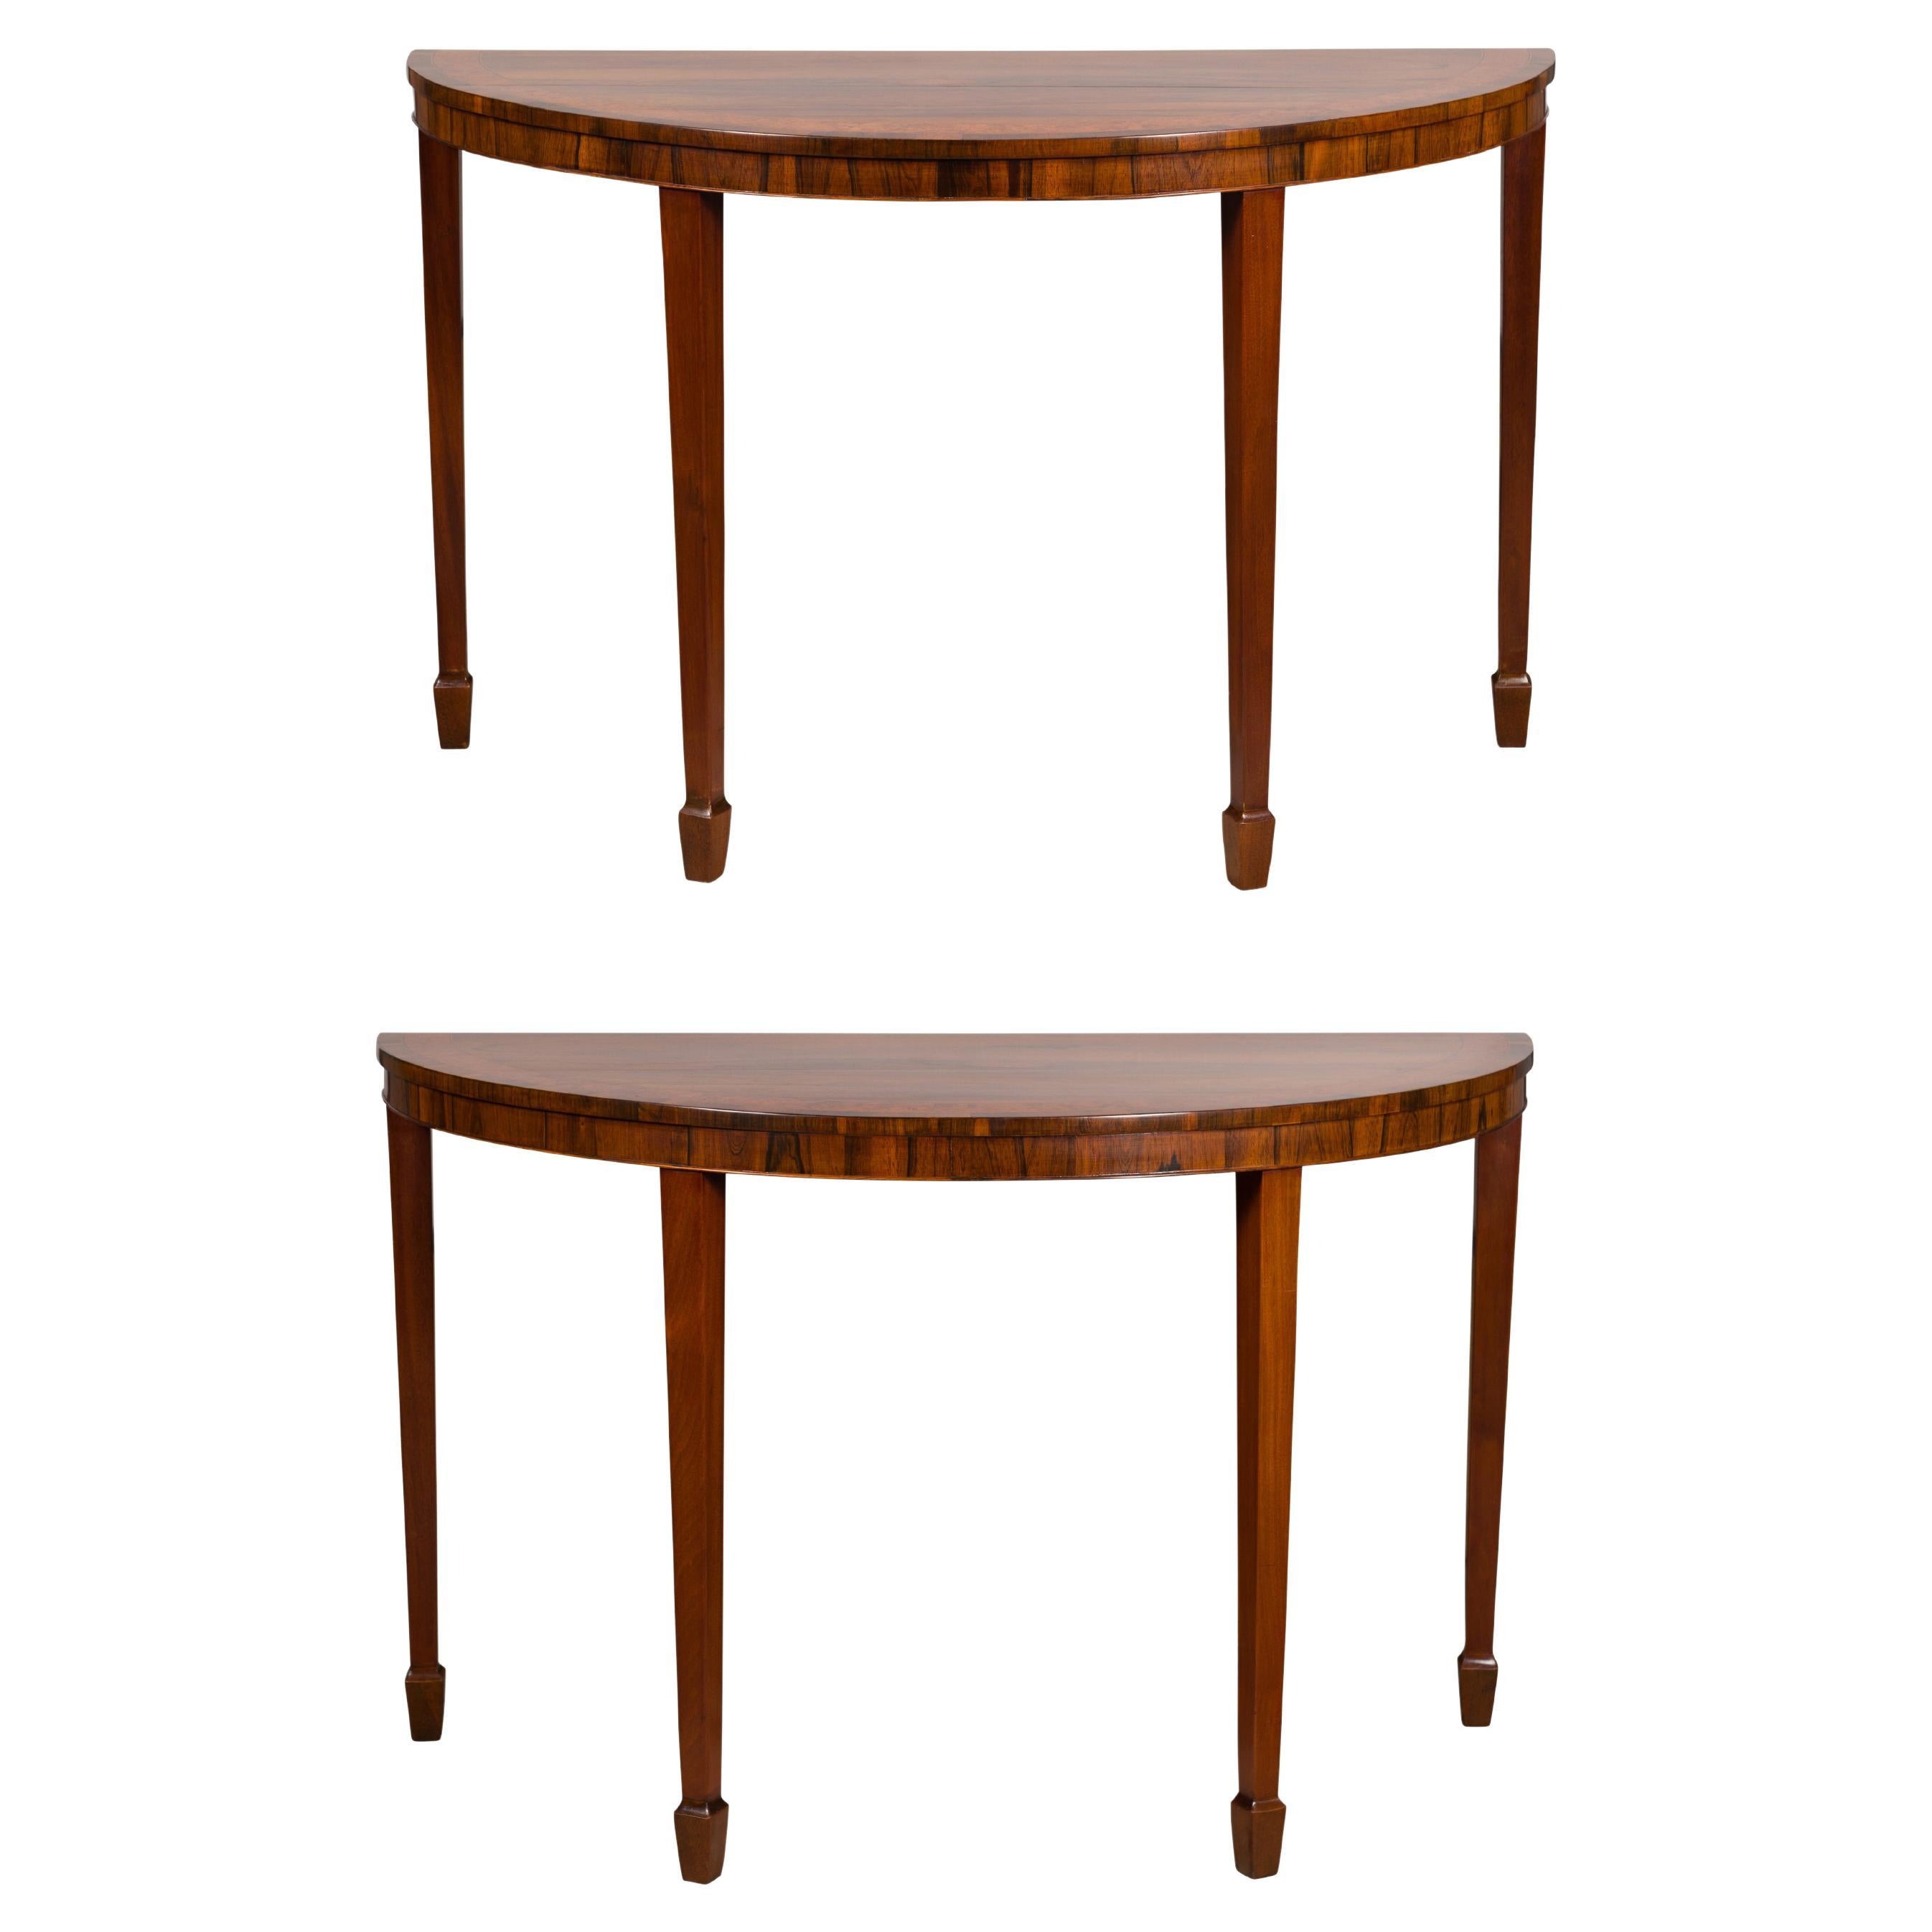 English 19th Century Mahogany Demilune Console Tables with Tapered Legs, a Pair For Sale